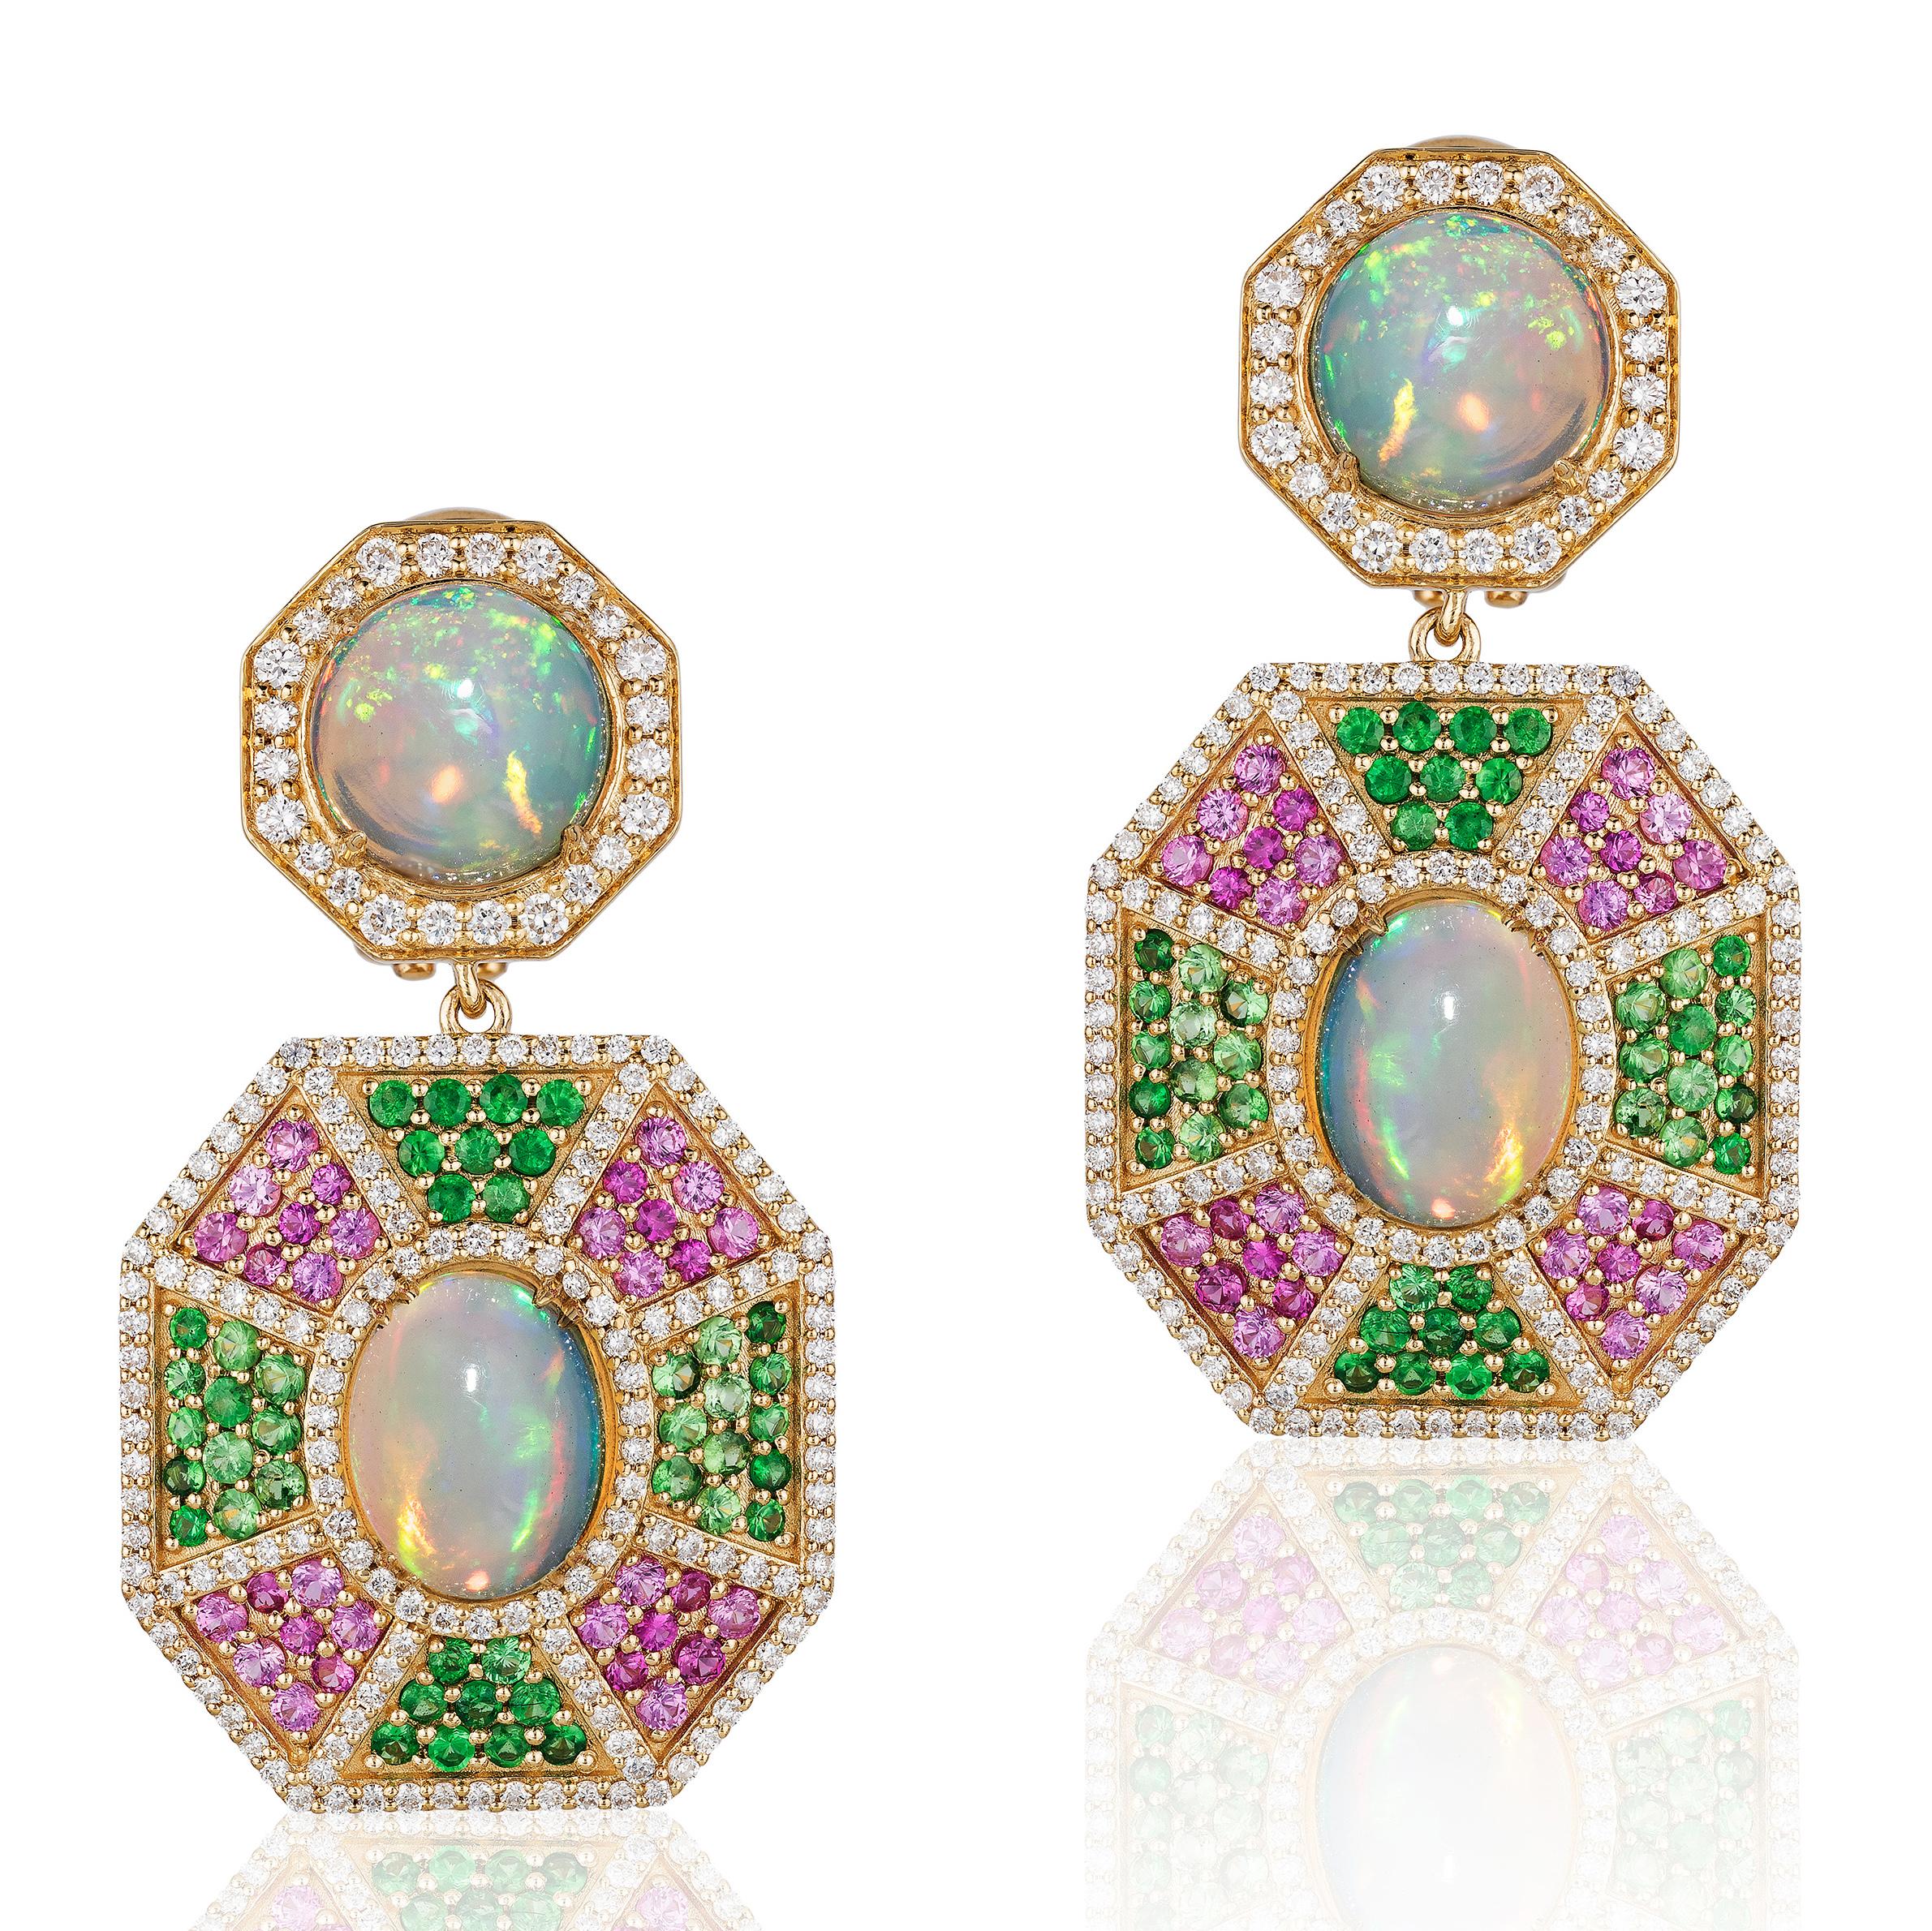 Contemporary Goshwara Opal, Tsavorite, Pink Sapphire With Diamond Ring & Earrings For Sale